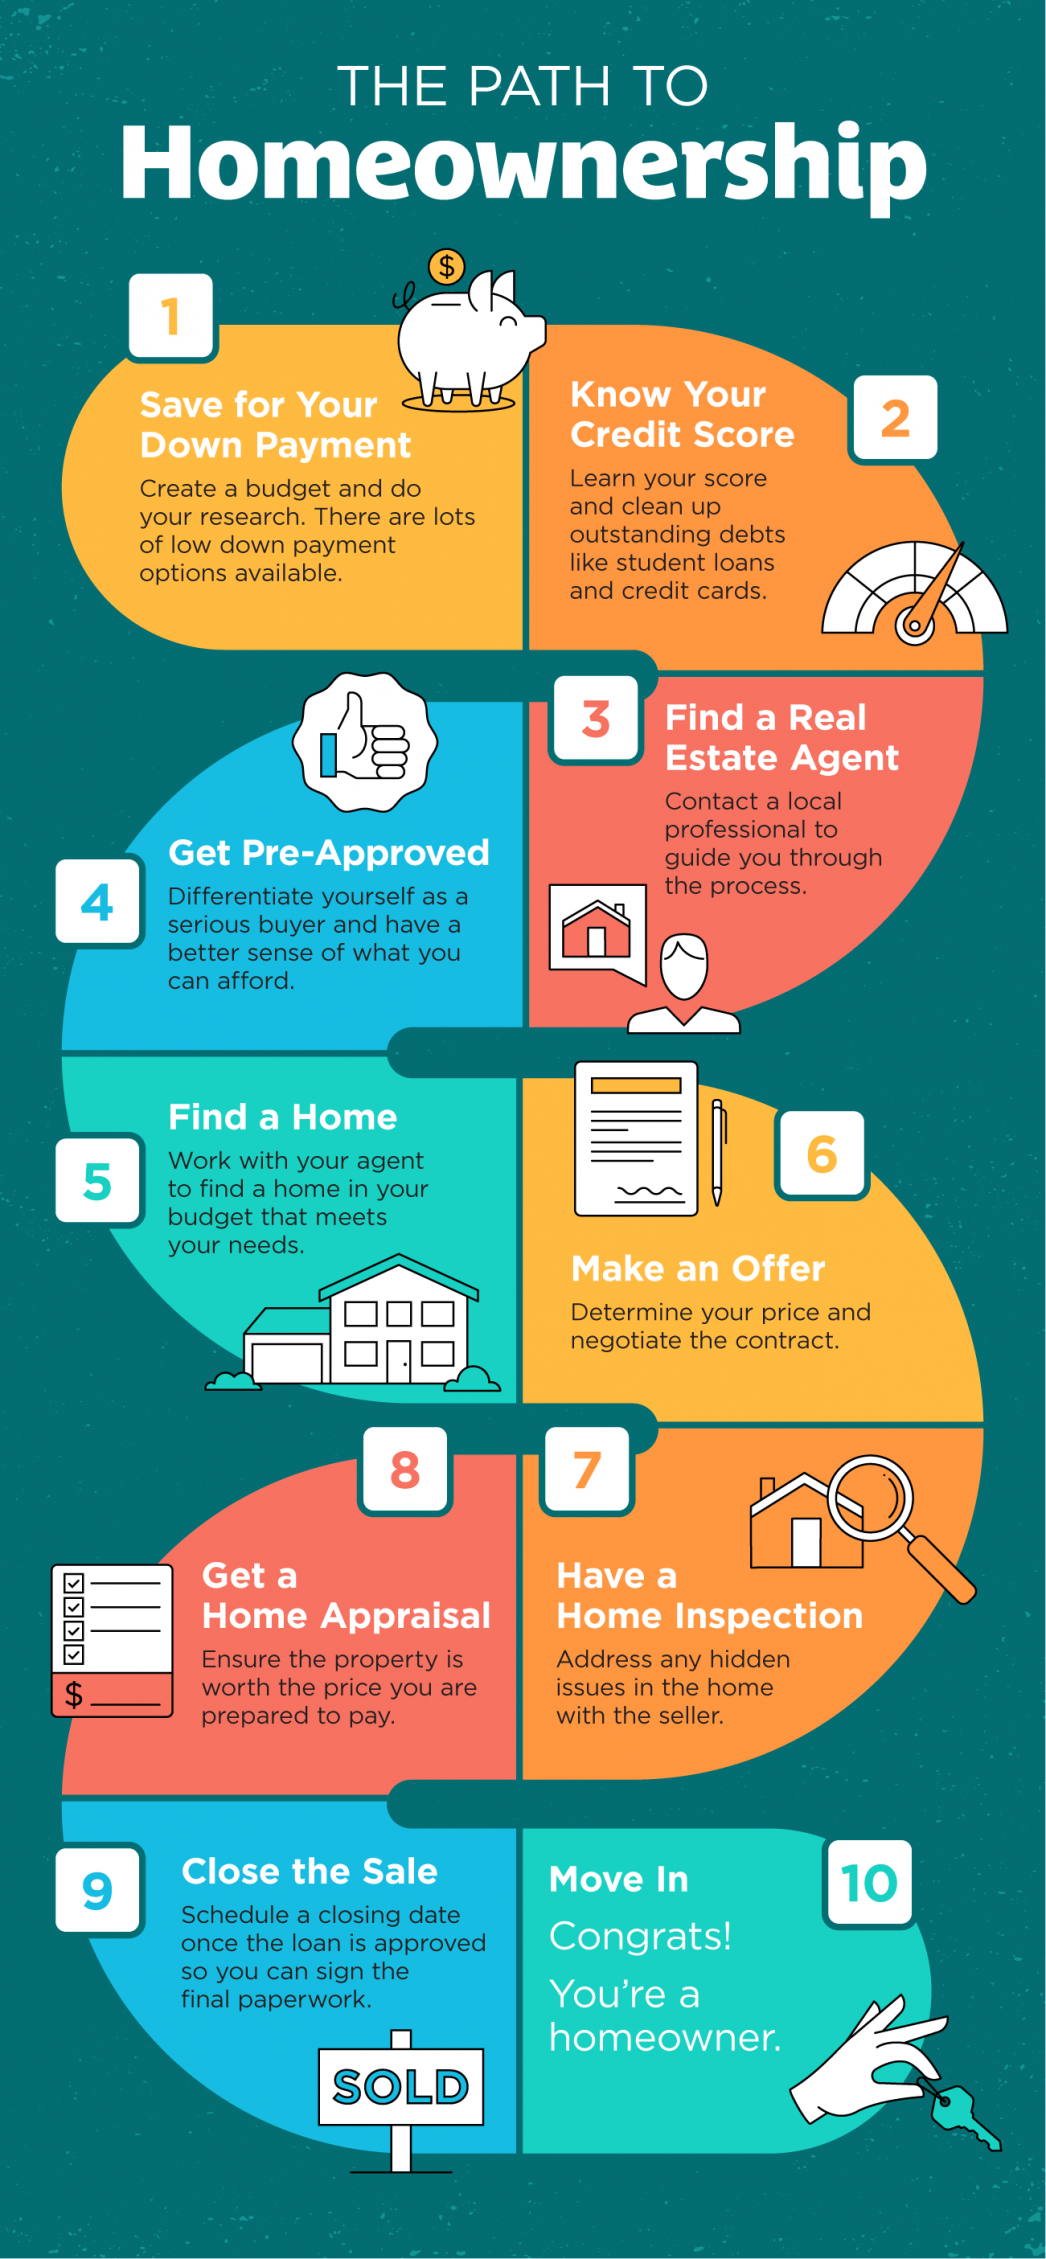 The Path to Homeownership [INFOGRAPHIC] | MyKCM